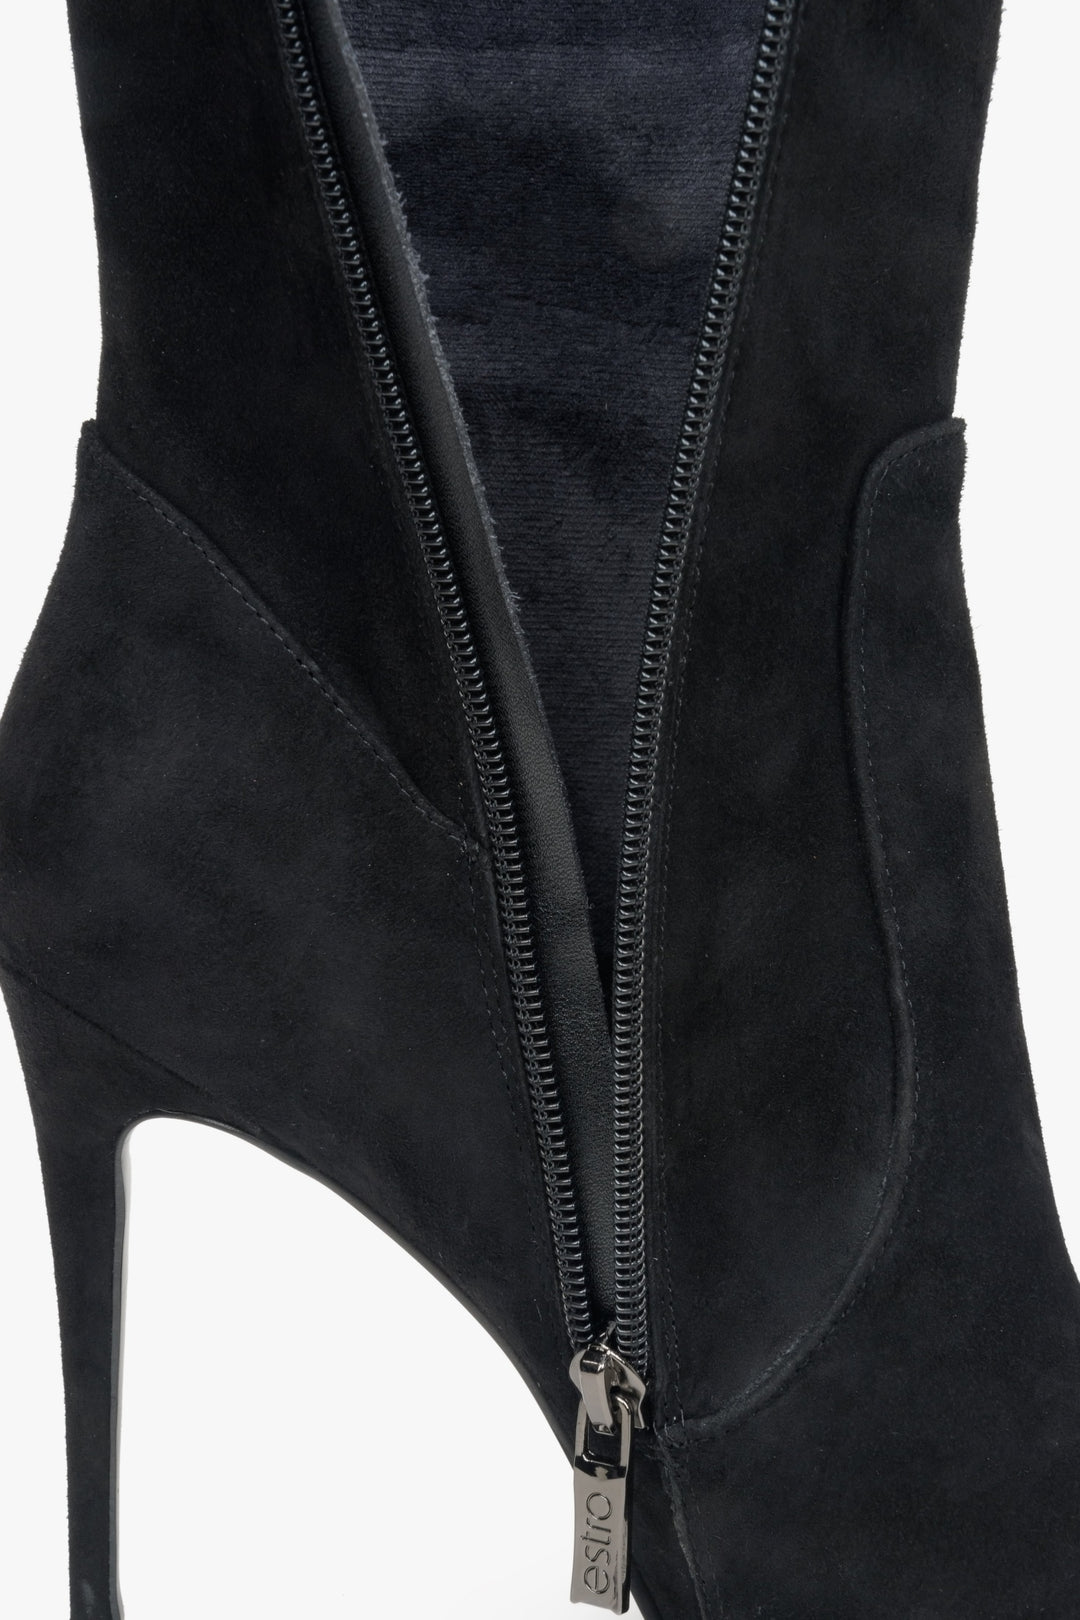 Black knee-high boots made of velour in black.